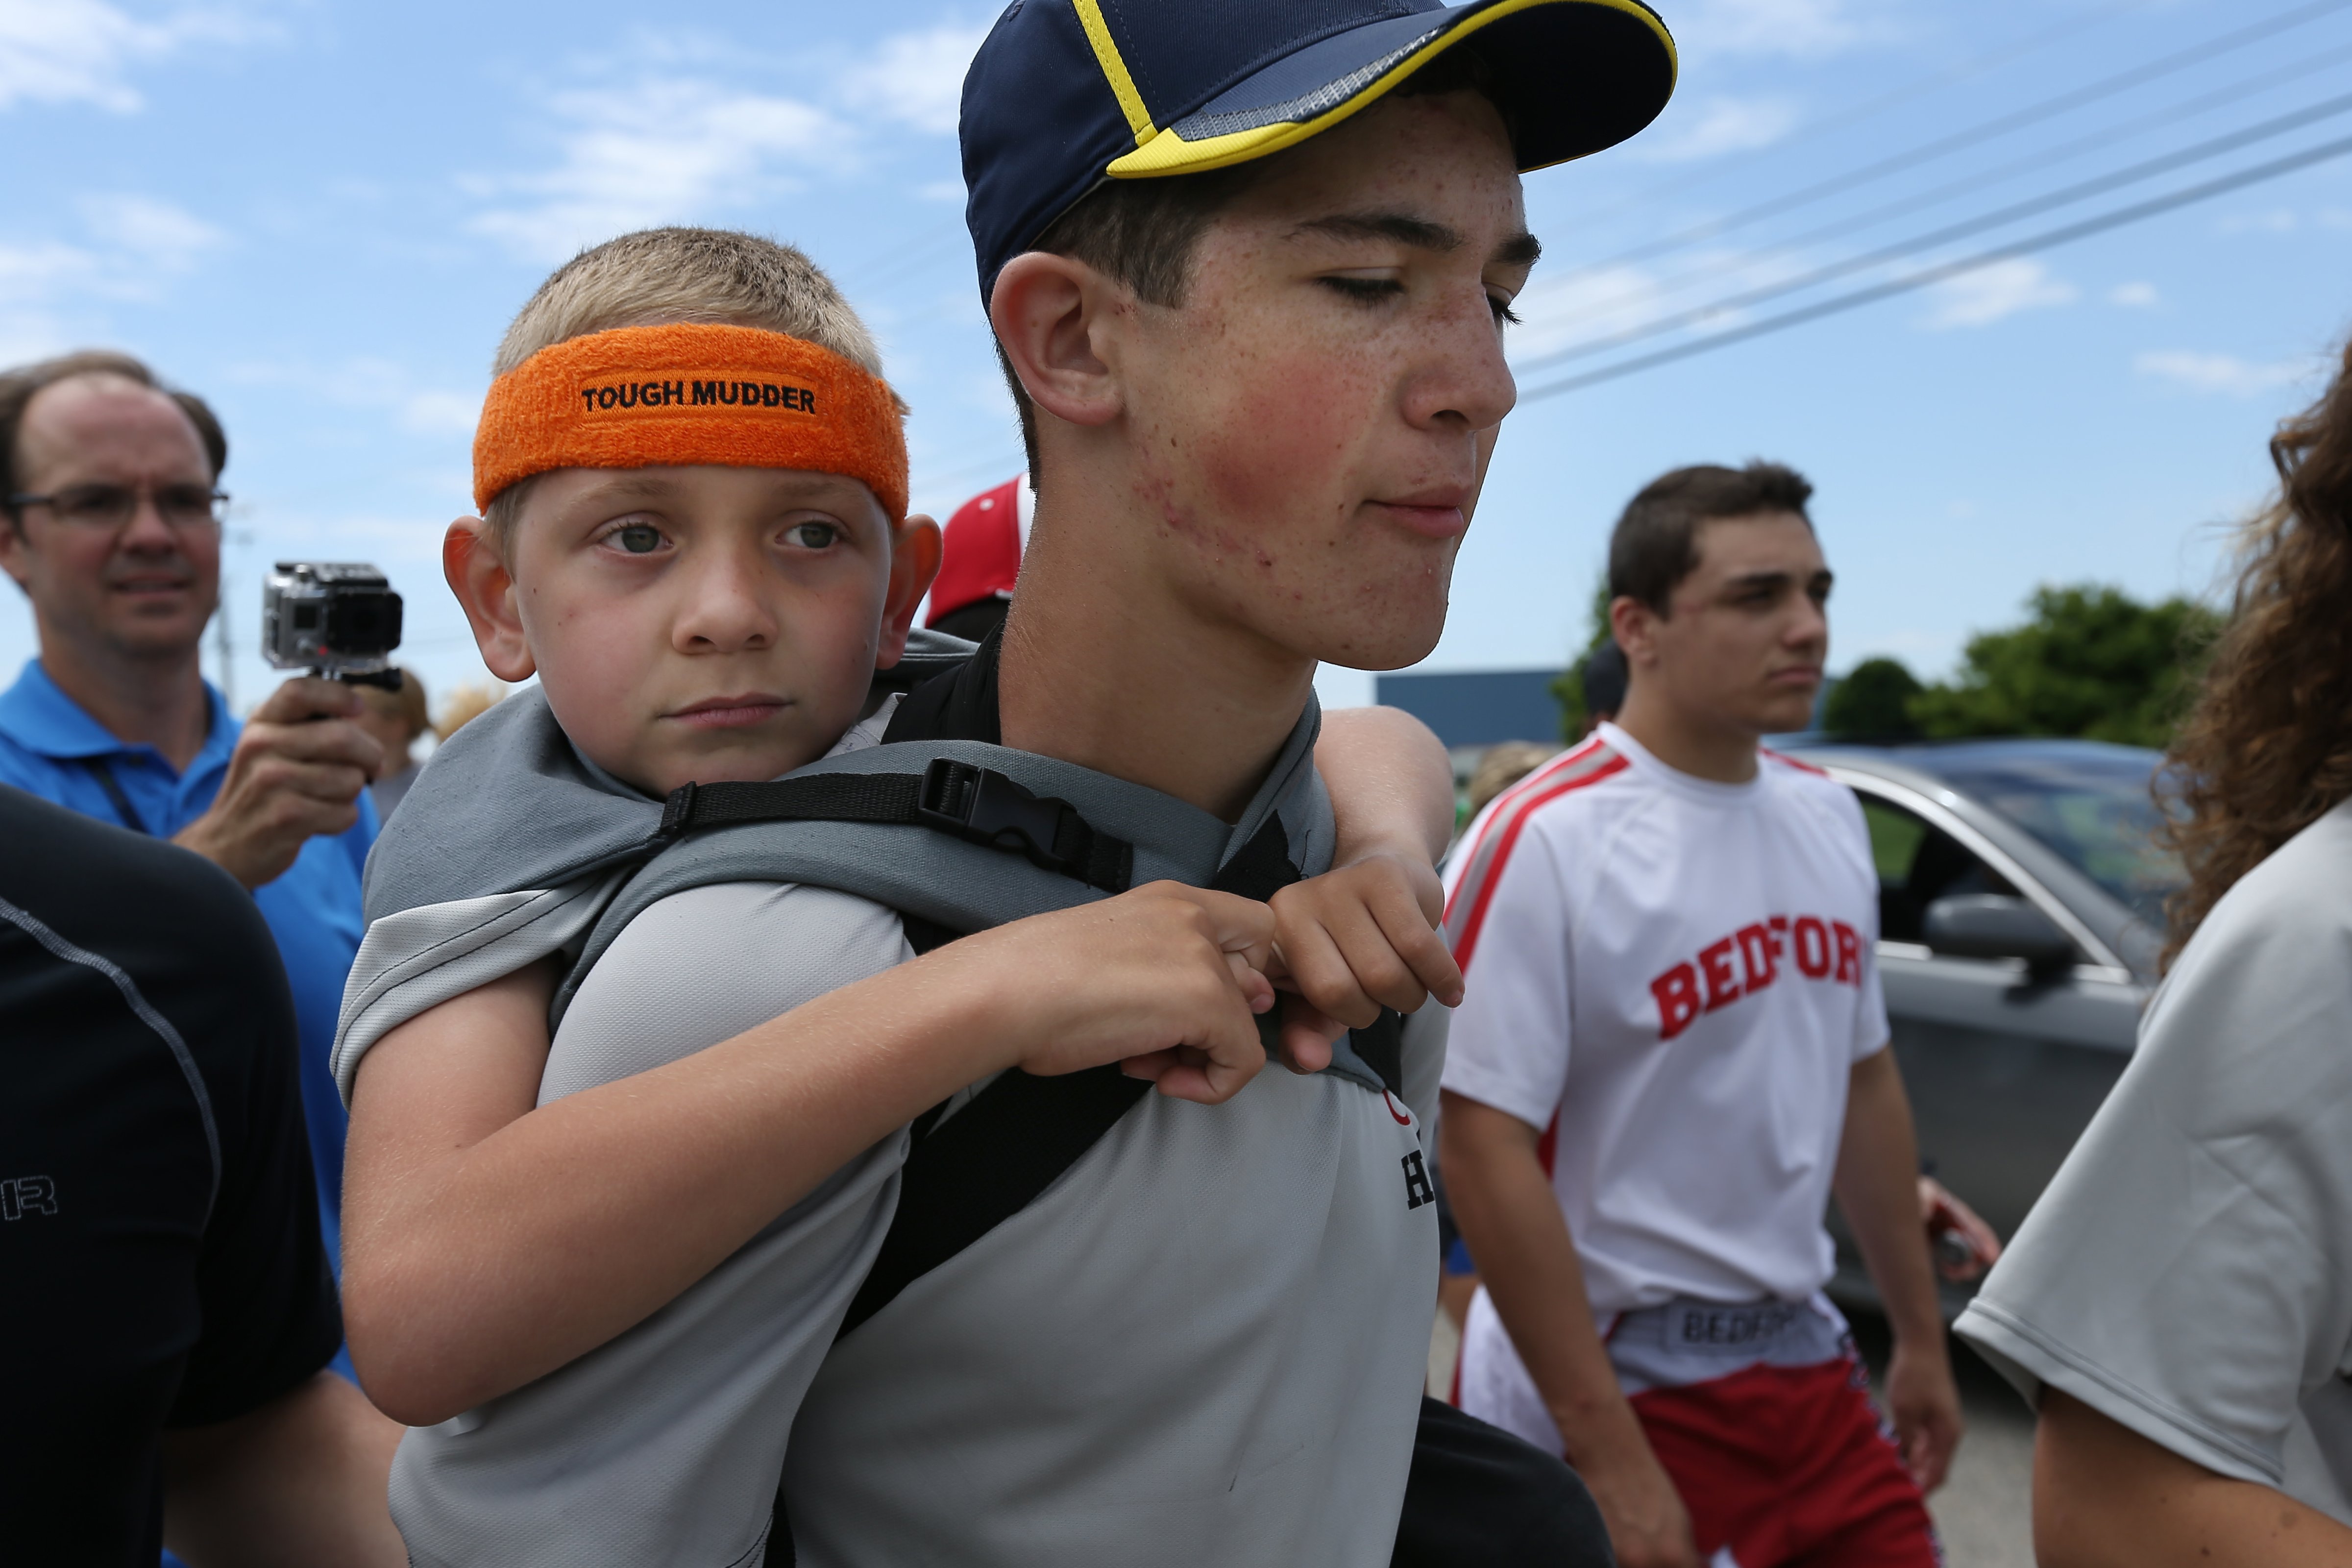 Braden Gandee, 7, rides on the back of his brother Hunter, 14, as they close in on the final miles to the University of Michigan's Bahna Wrestling Center on Sunday, June 8, 2014. Hunter carried Braden, who has cerebral palsy, 40 miles from Temperance, Mich., to Ann Arbor. (Chris Asadian—AP Photo)